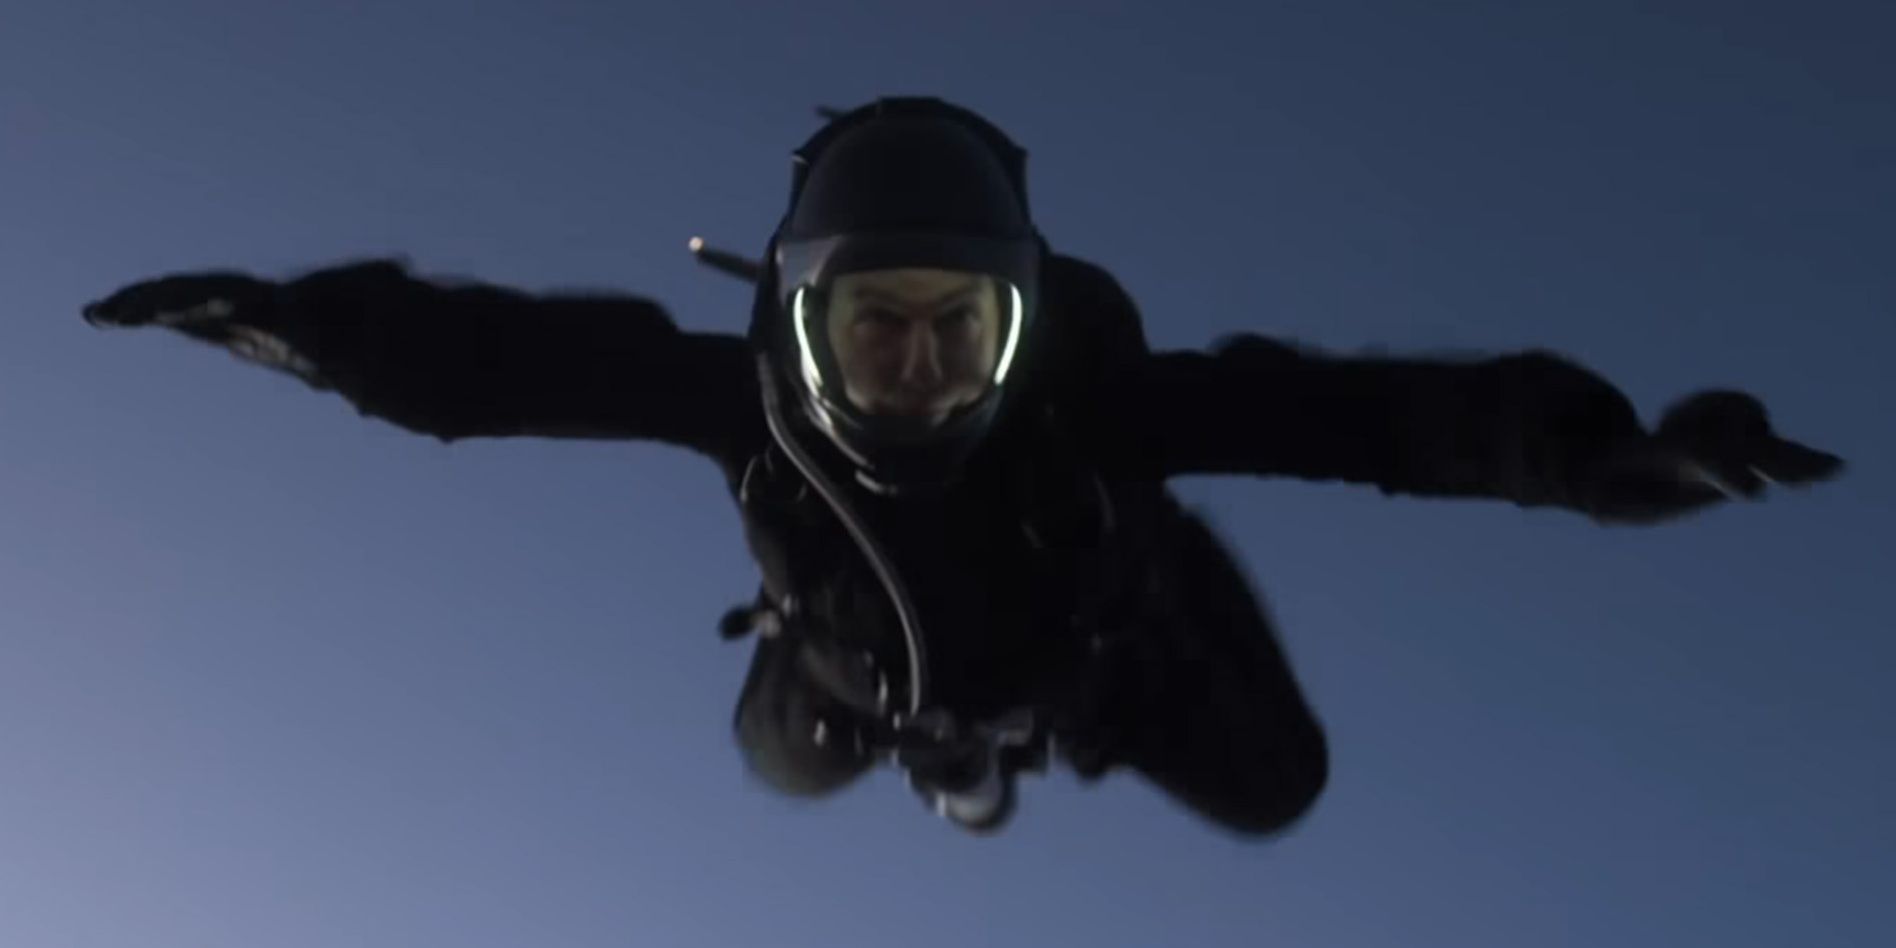 Ethan Hunt in the Halo Jump in MIssion Impossible - Fallout